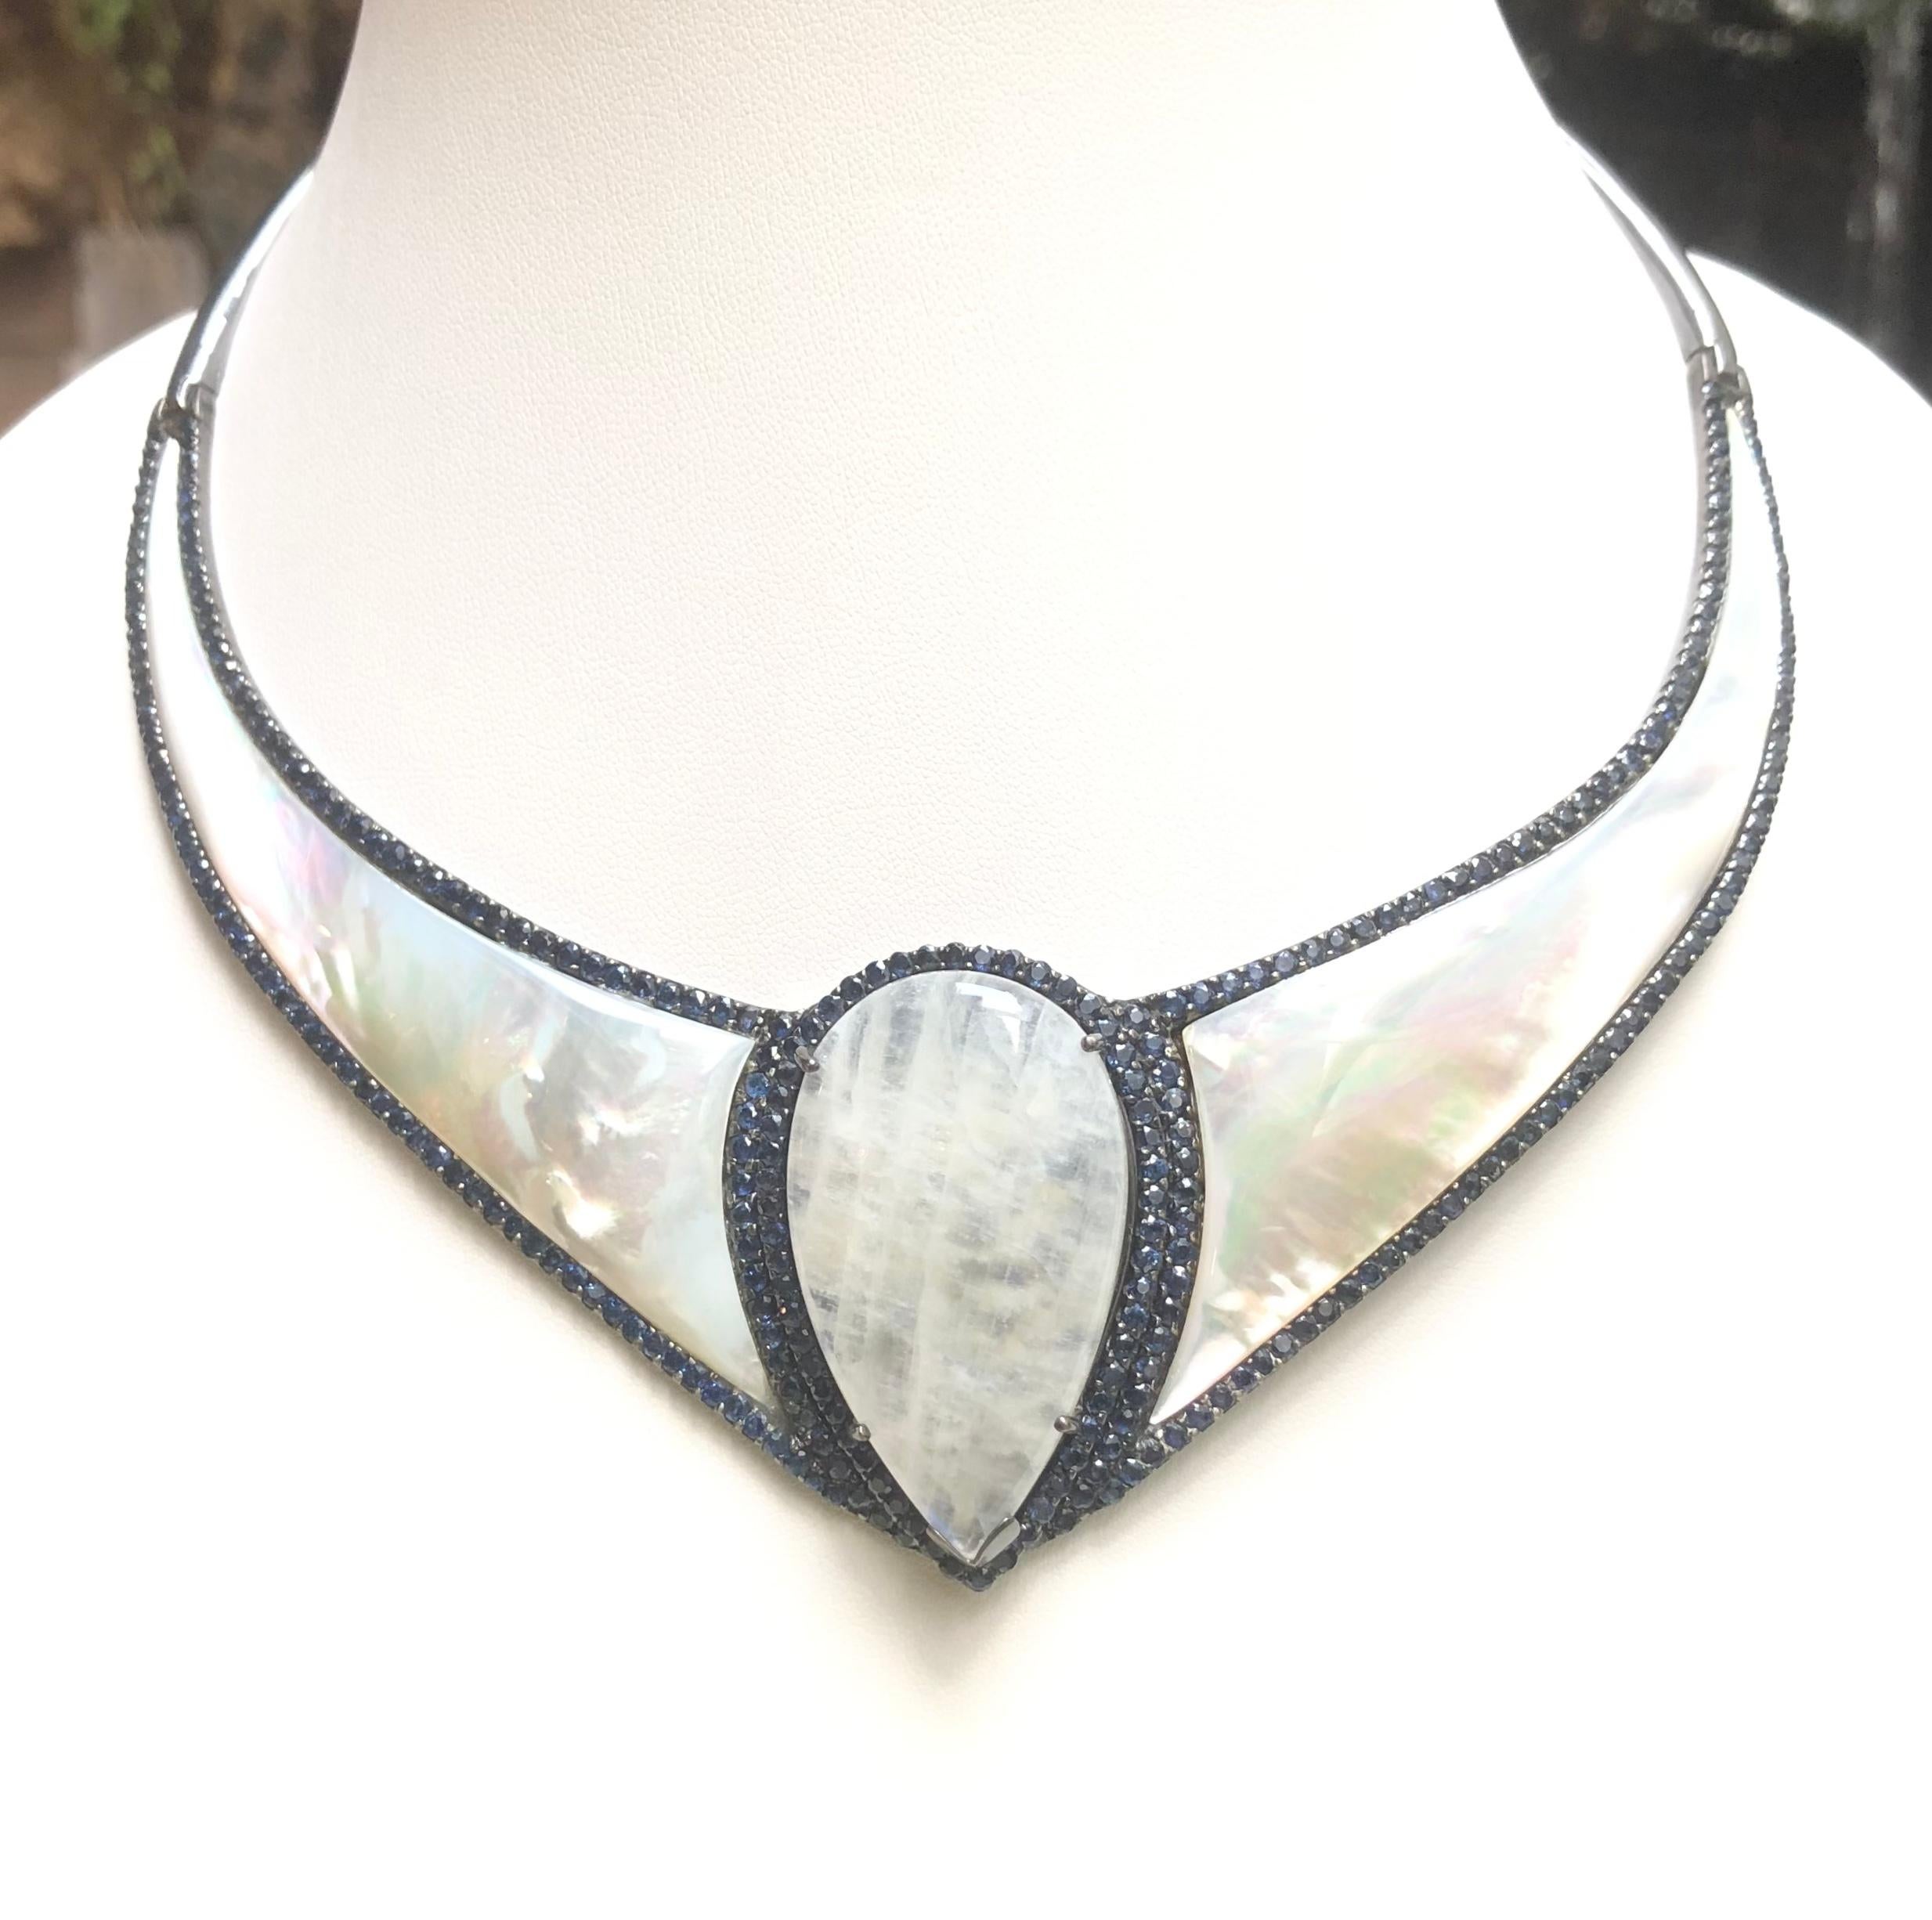 Mother of Pearl, Moonstone and Blue Sapphire Necklace set in Silver Settings

Width:  4.1 cm 
Length:  18.0 cm
Total Weight: 108.3 grams

*Please note that the silver setting is plated with rhodium to promote shine and help prevent oxidation. 